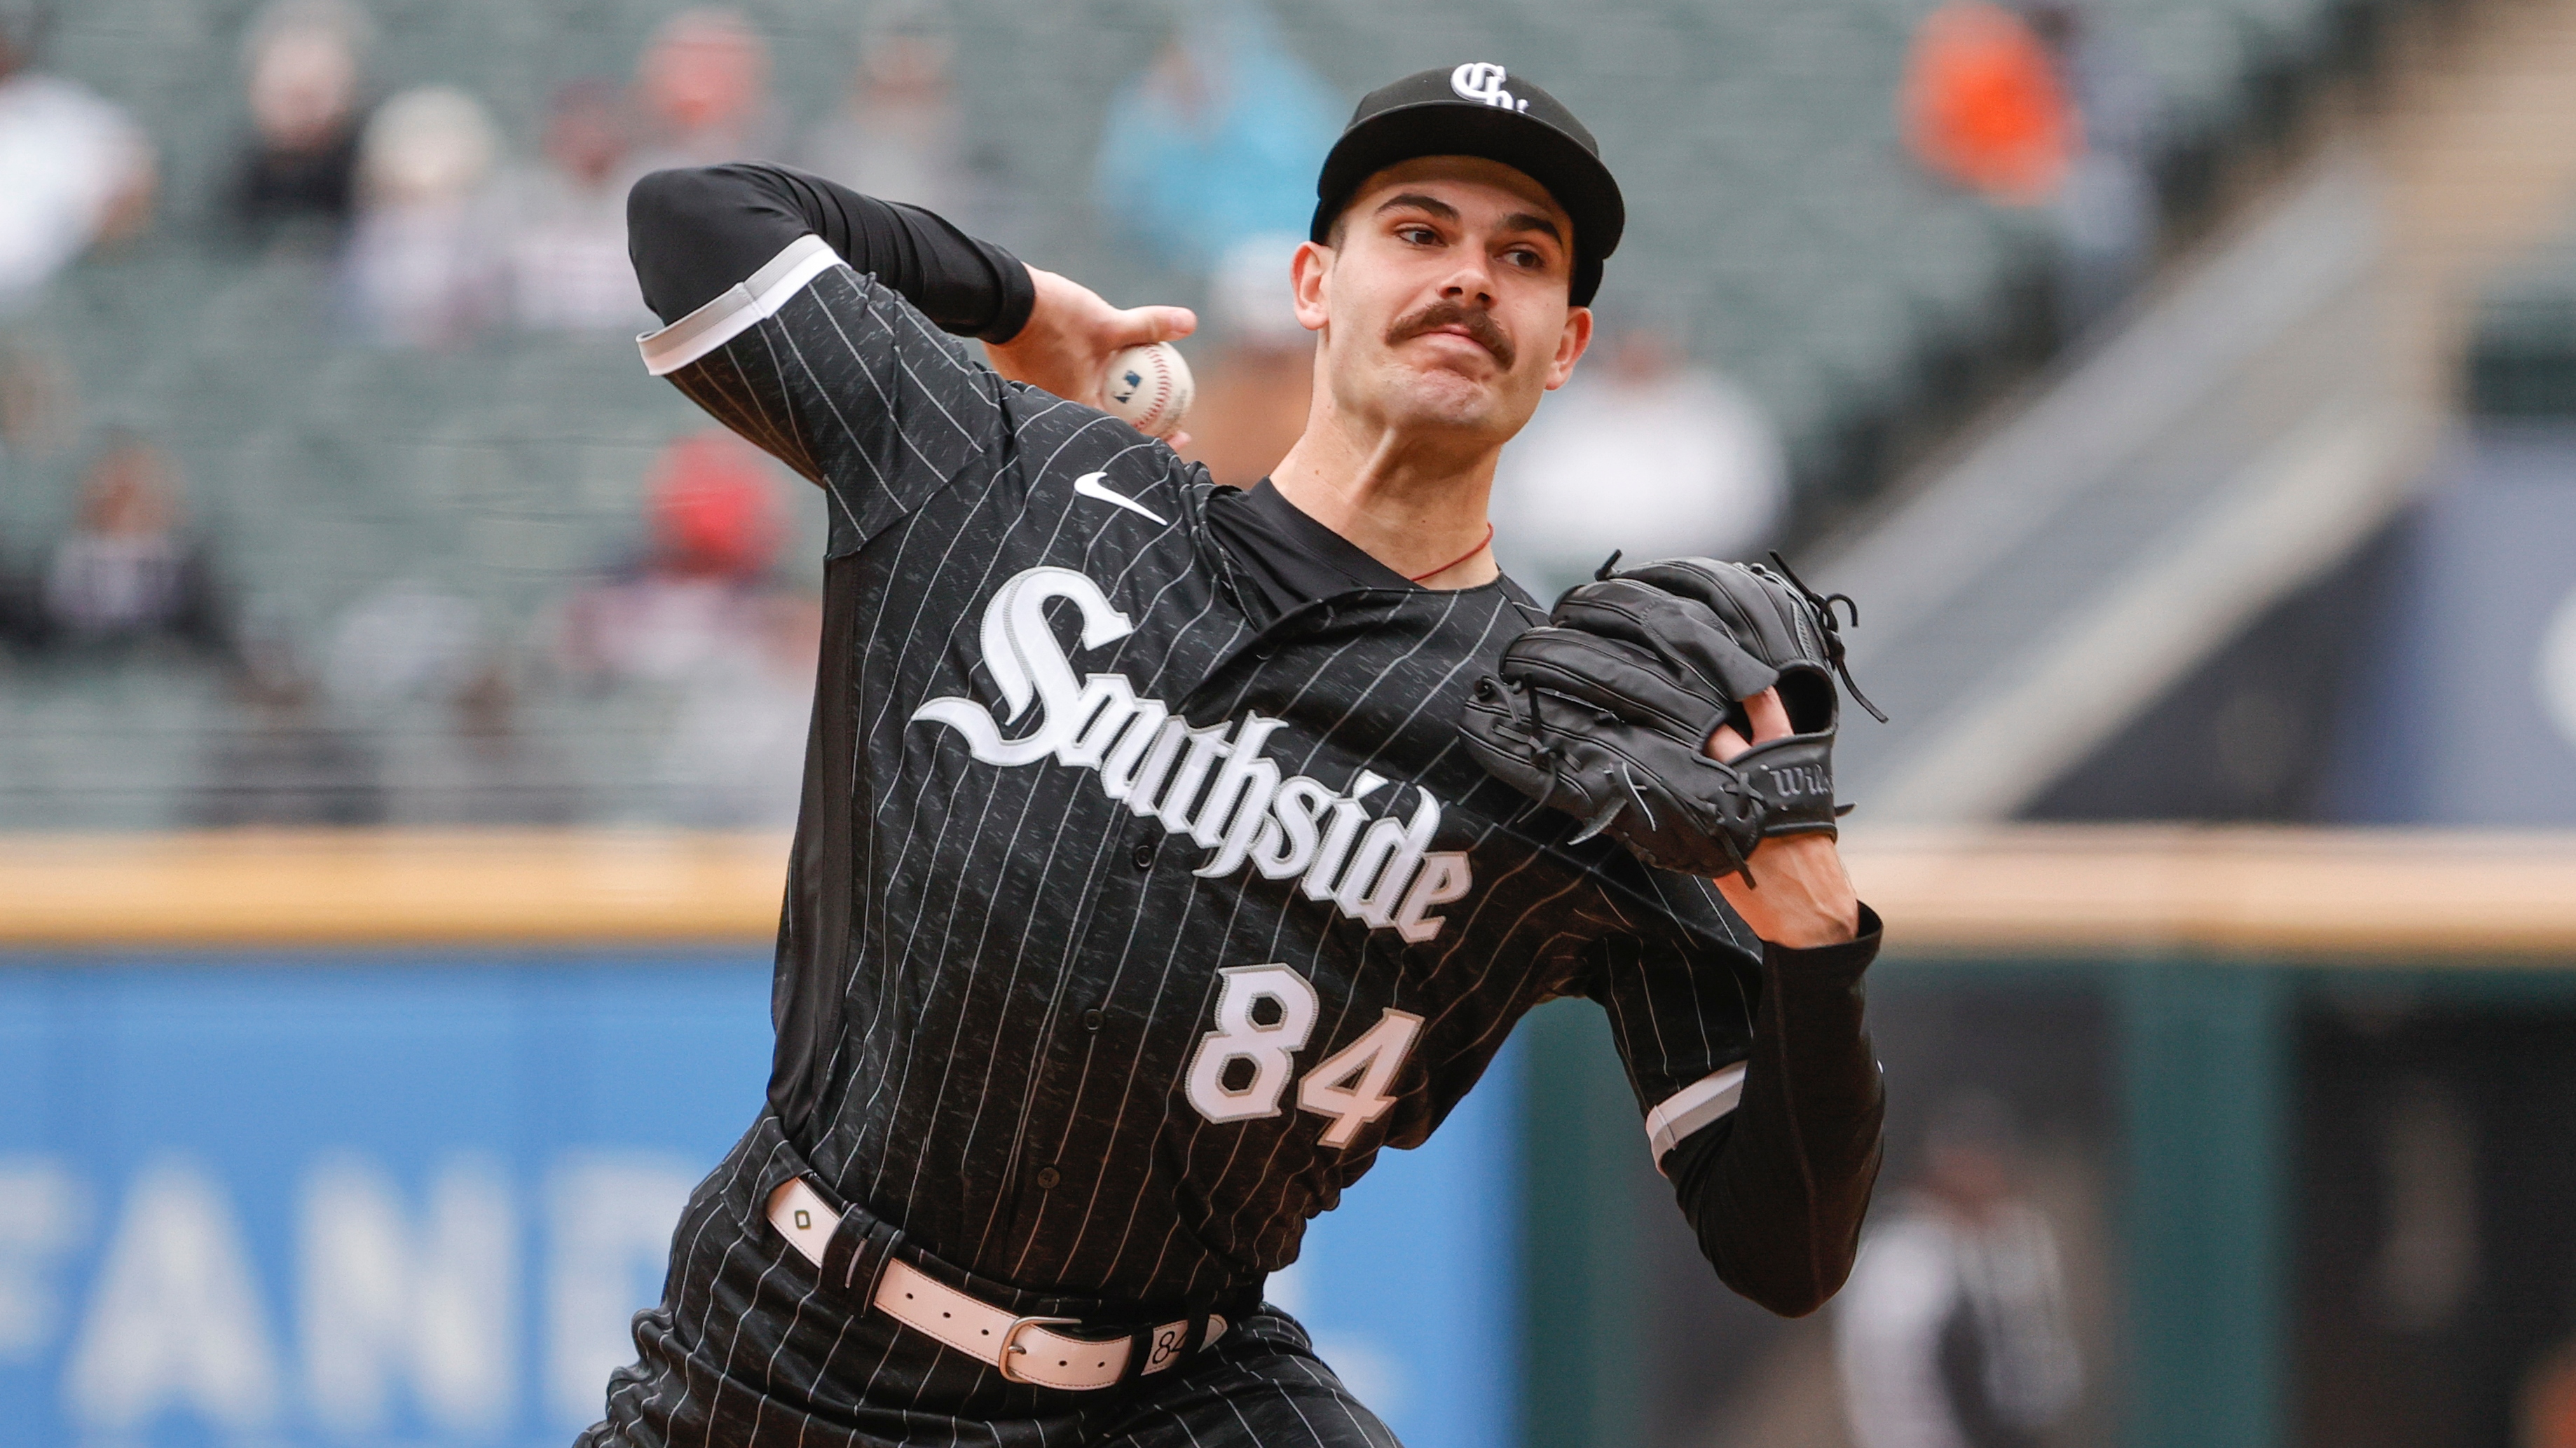 Ranking All the Current White Sox Uniforms From Worst to Best